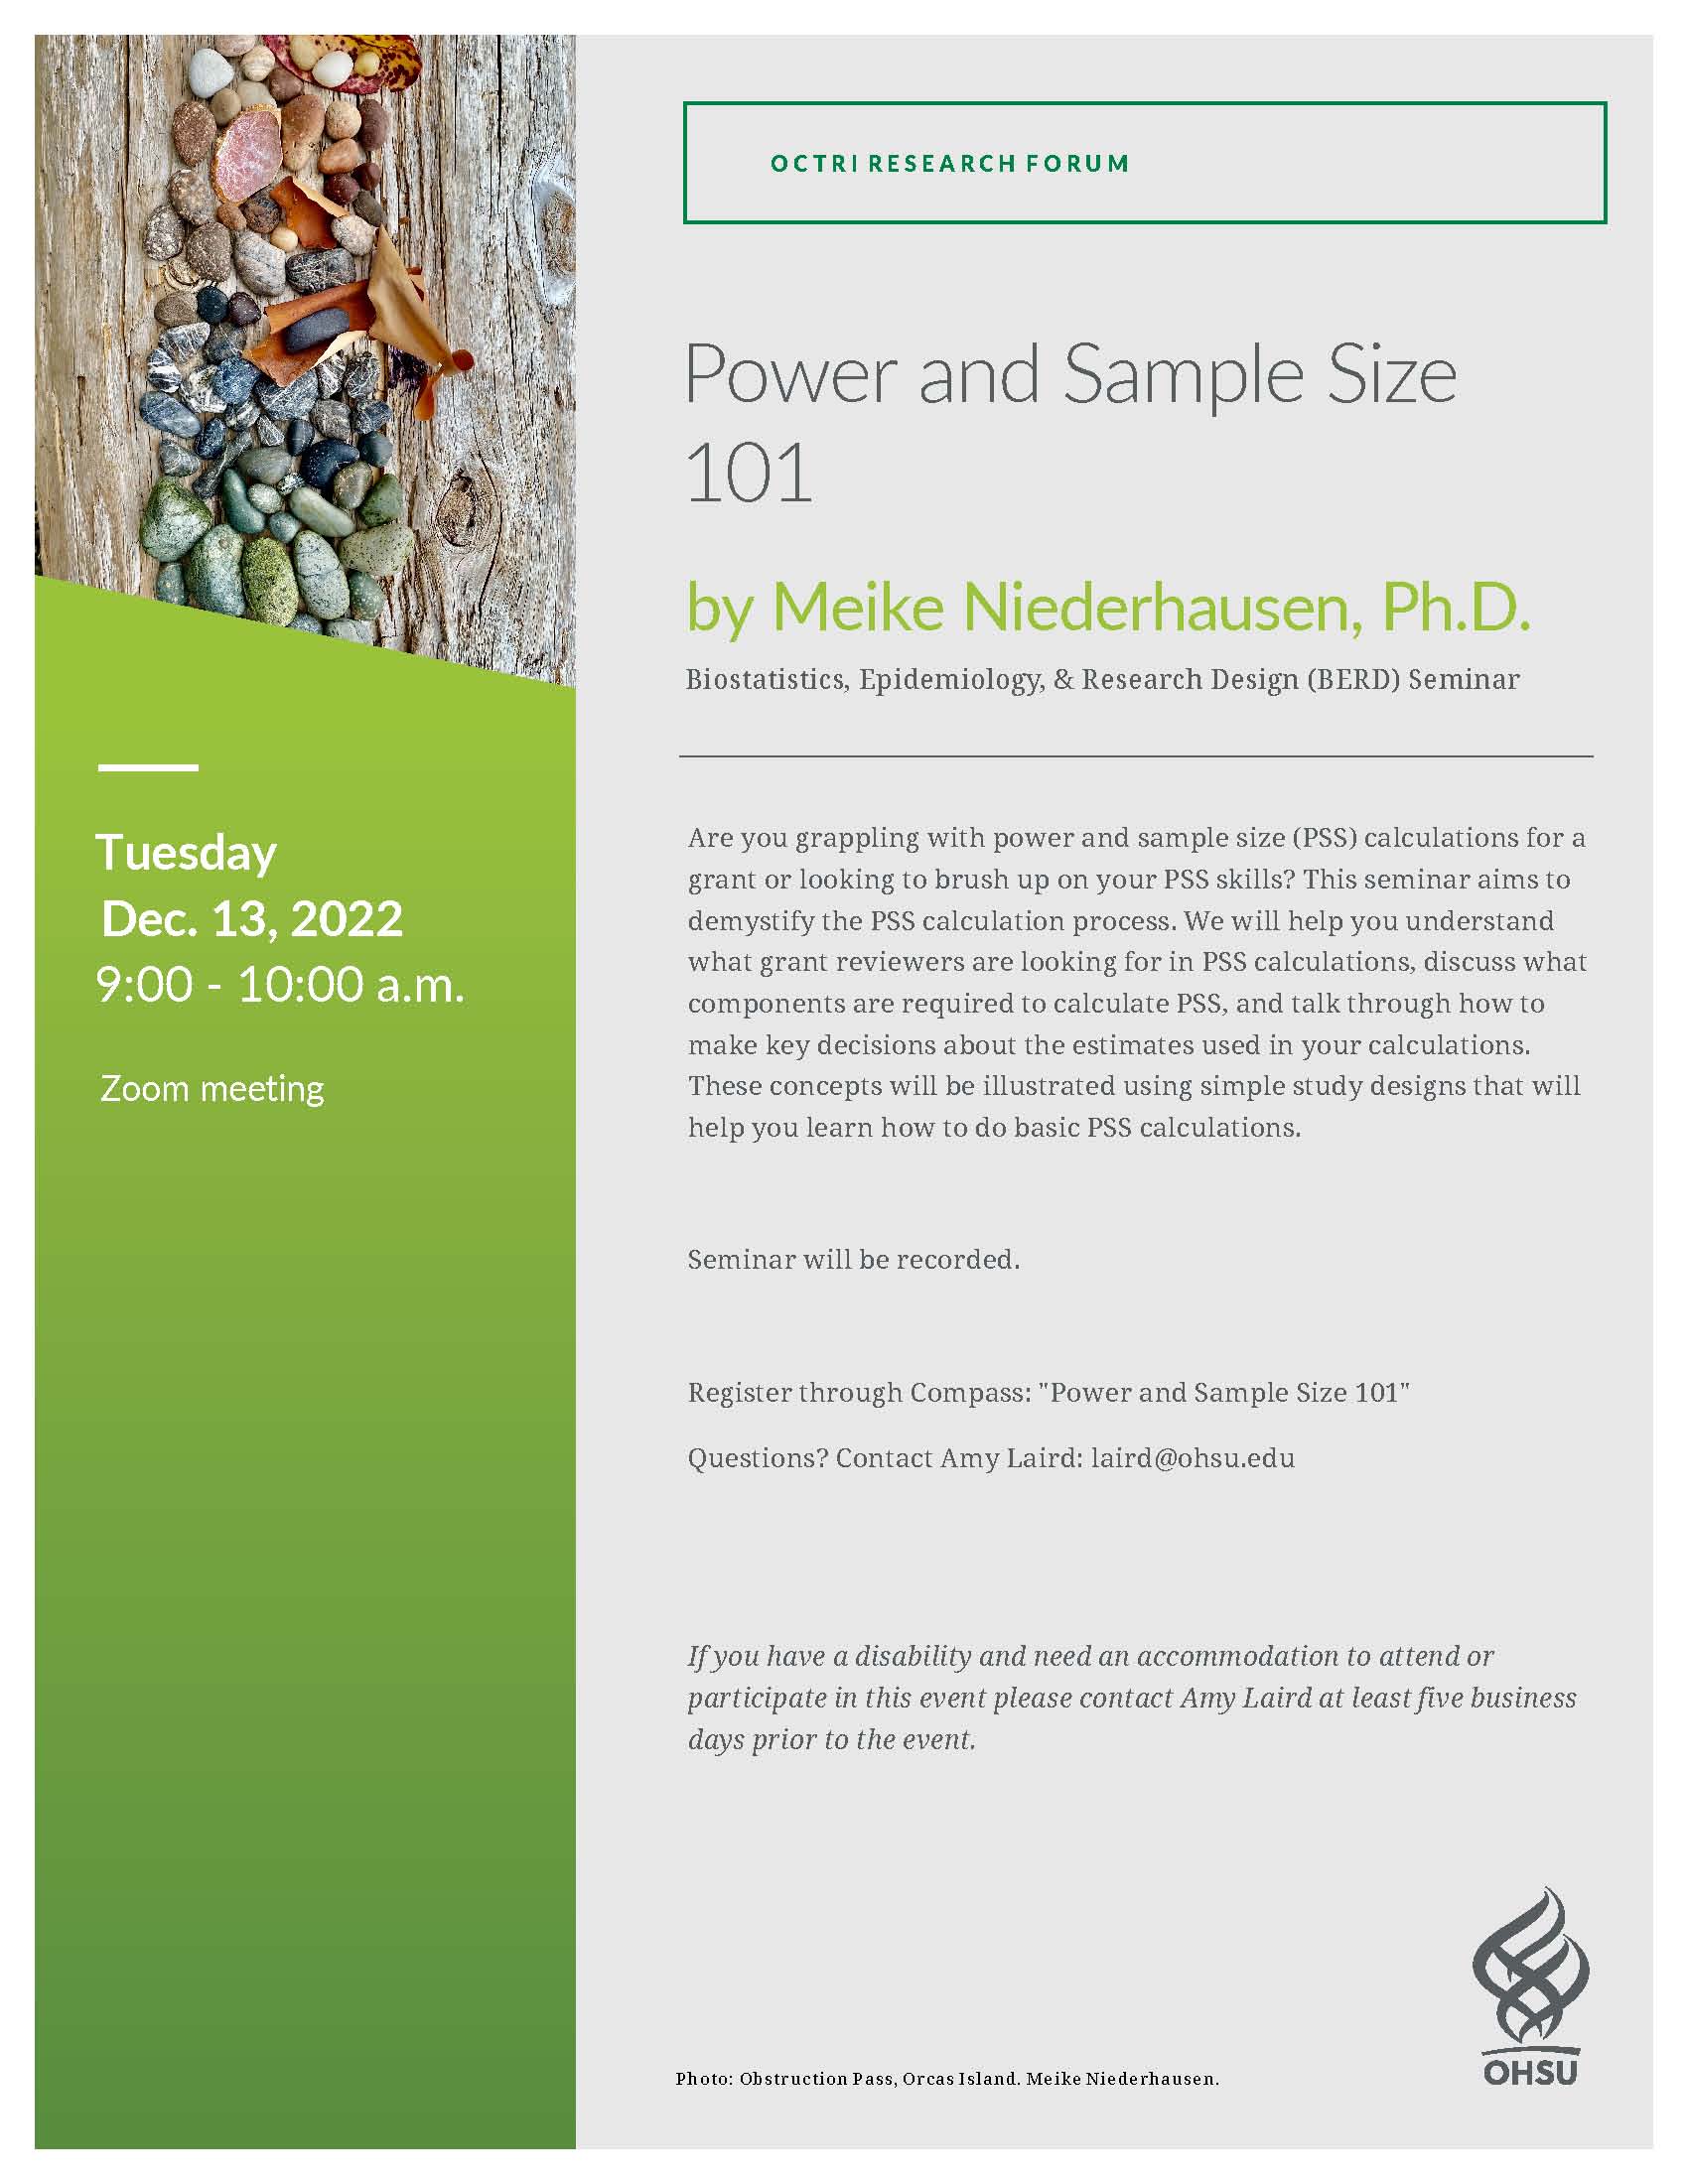 Power and Size Sample Size 101 Flyer